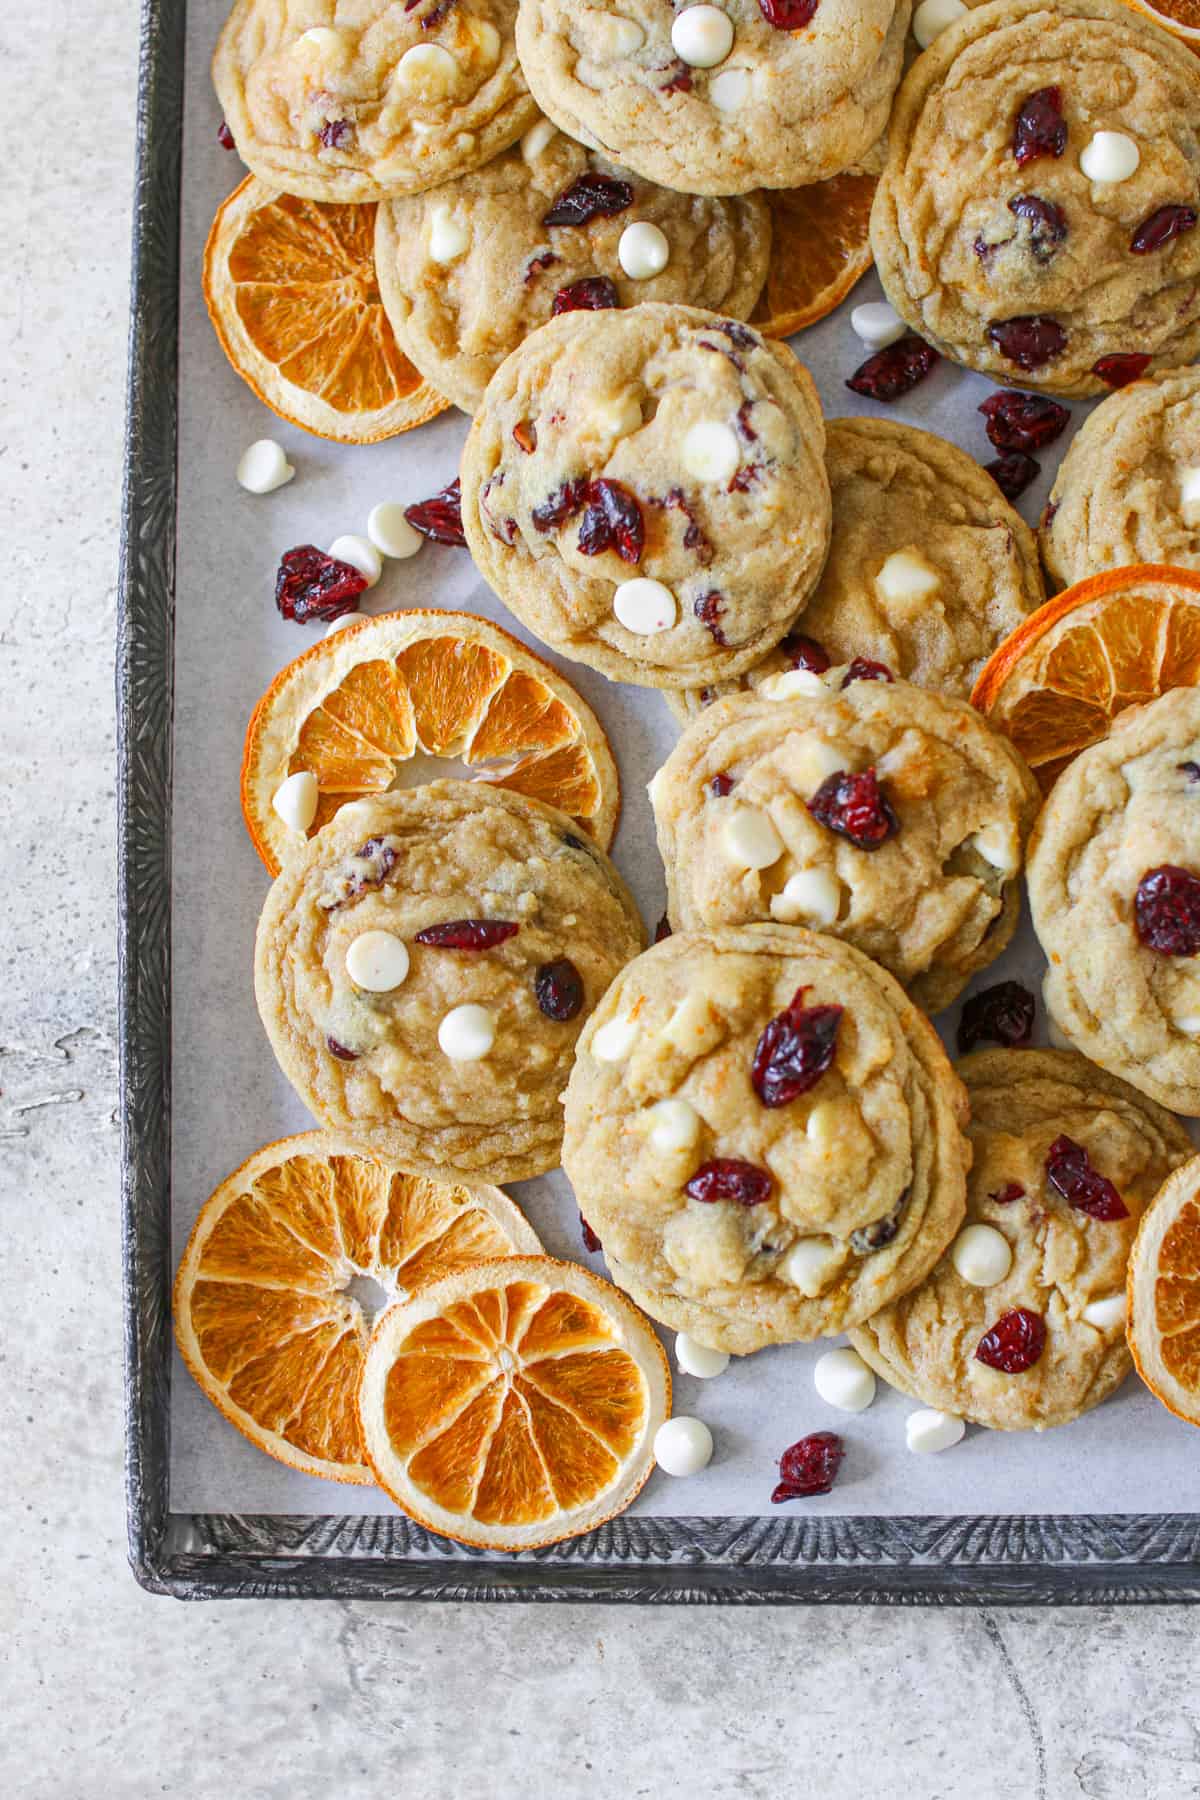 Overhead of High Altitude White Chocolate Cranberry Orange Cookies on a vintage baking sheet lined with white parchment paper. The cookies are scattered along with dried sliced oranges and white chocolate chips and dried cranberries.